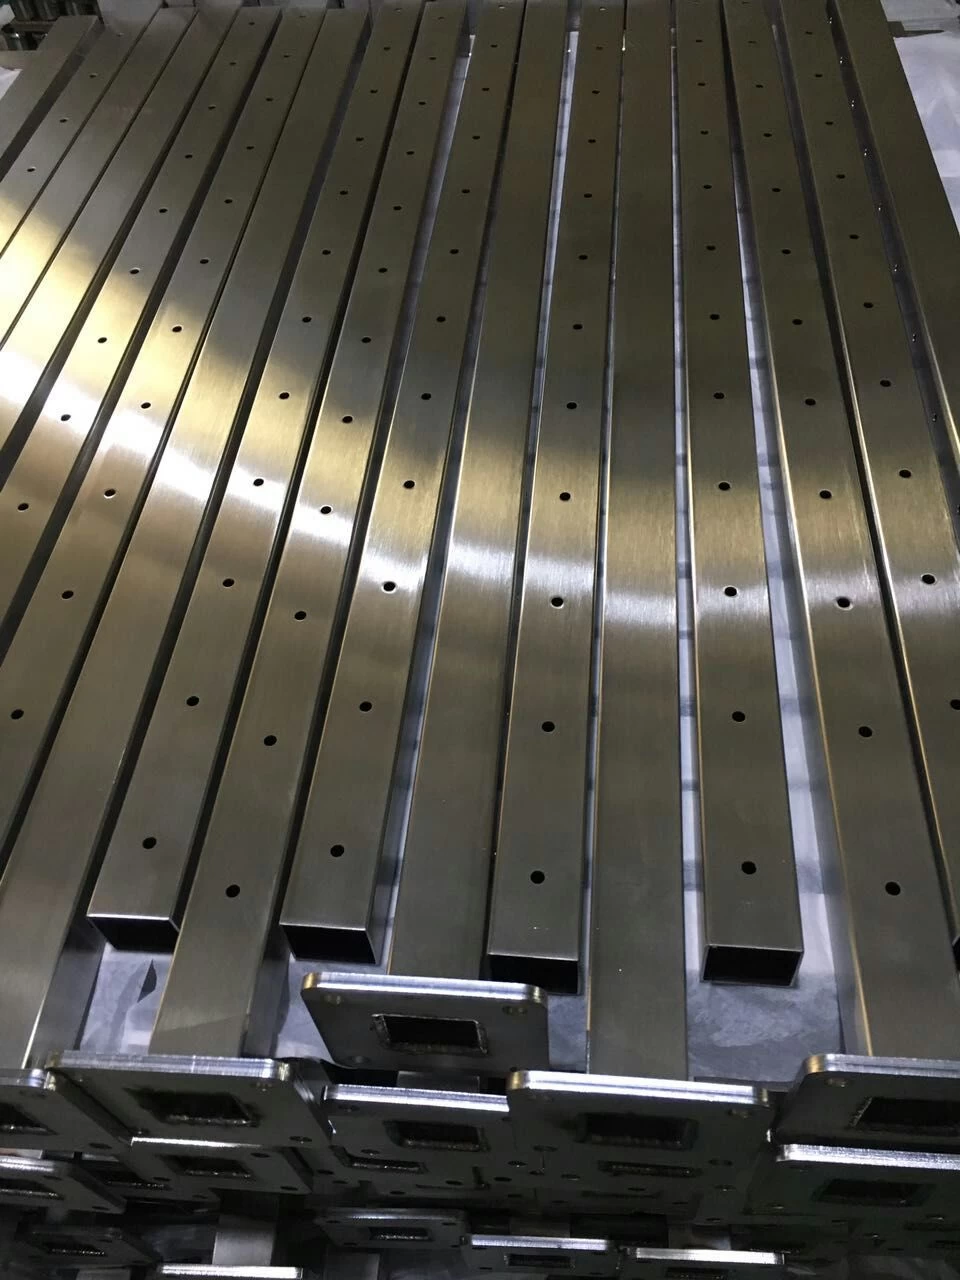 Cable railing stainless steel 316 square post for wire rope balustrade